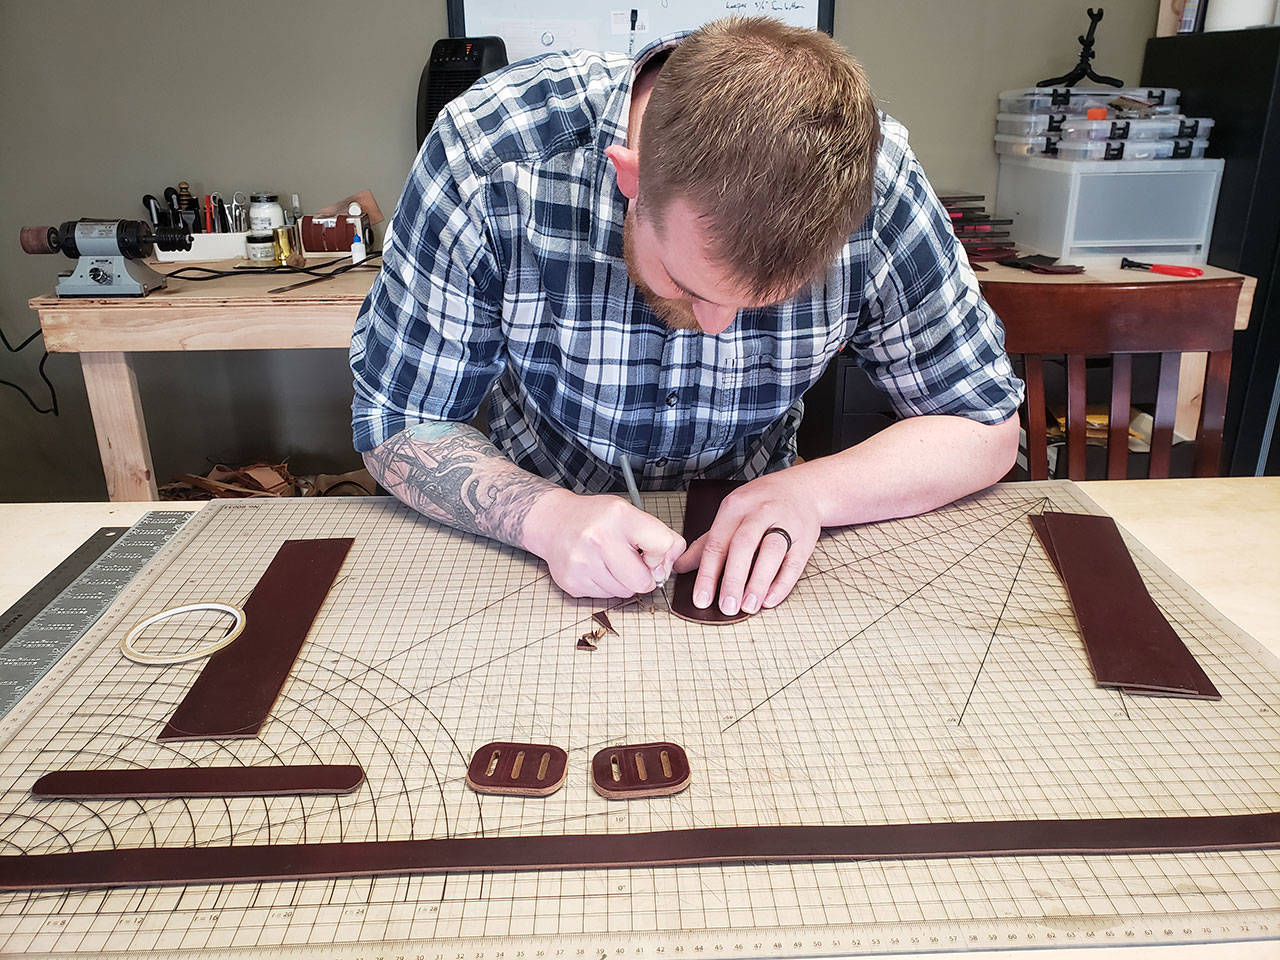 Bremerton leathercrafter Will Webb operates his business from his home.